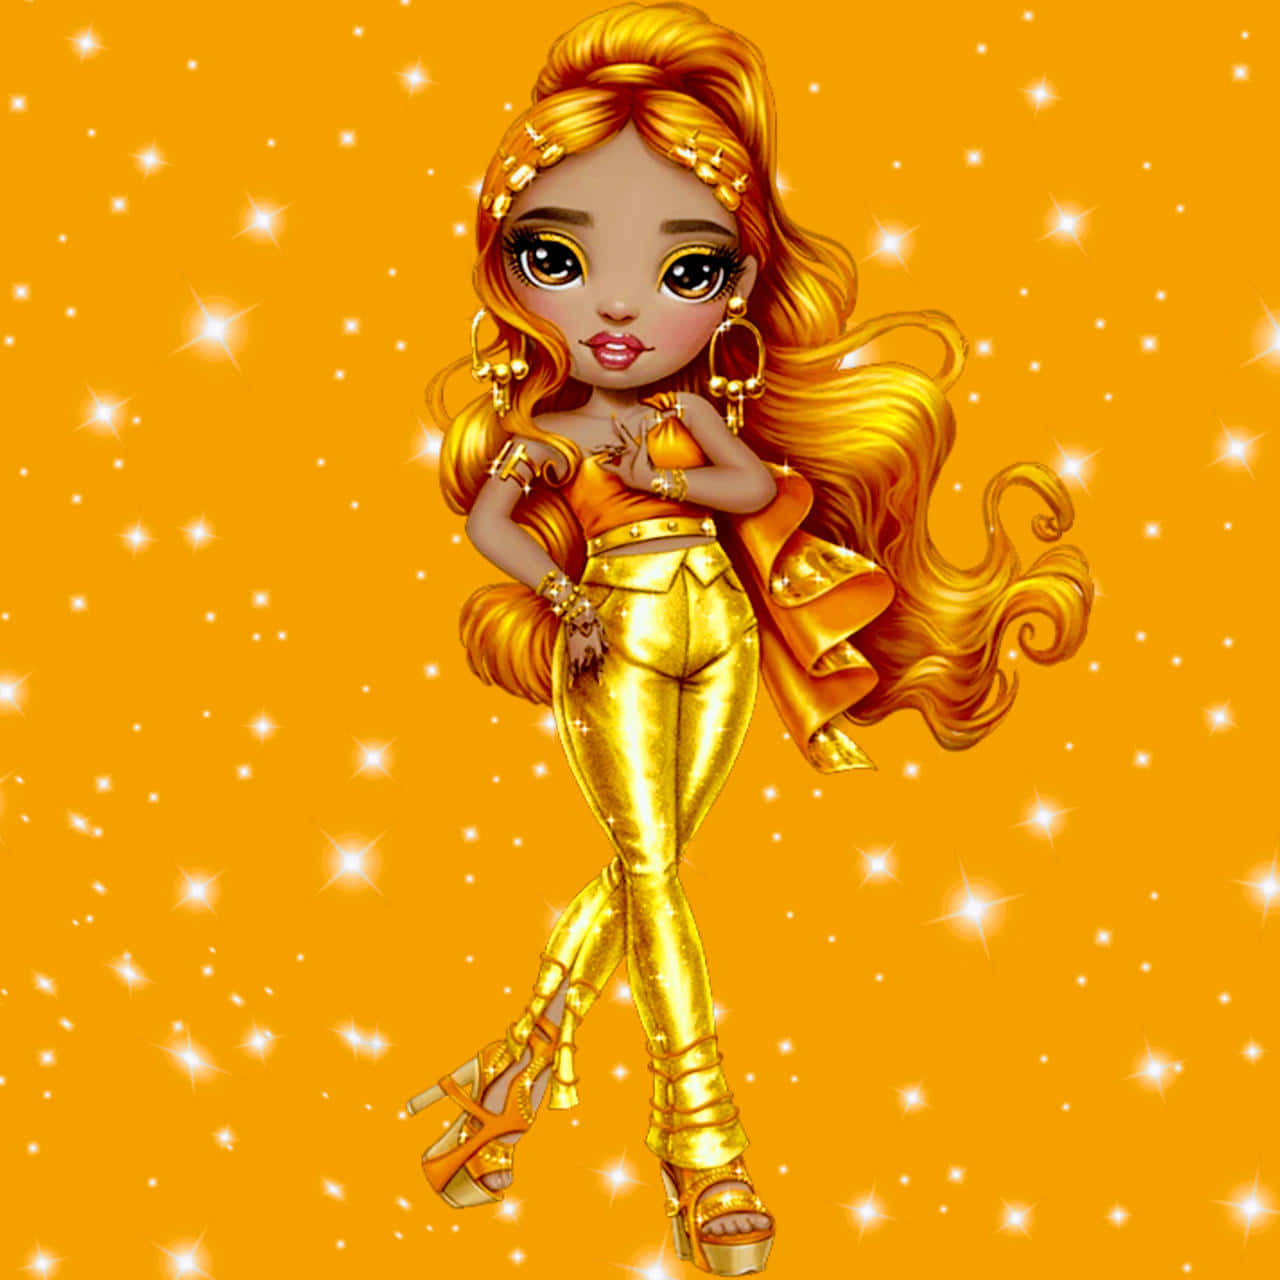 A Girl In Gold With Long Hair And A Golden Outfit Wallpaper